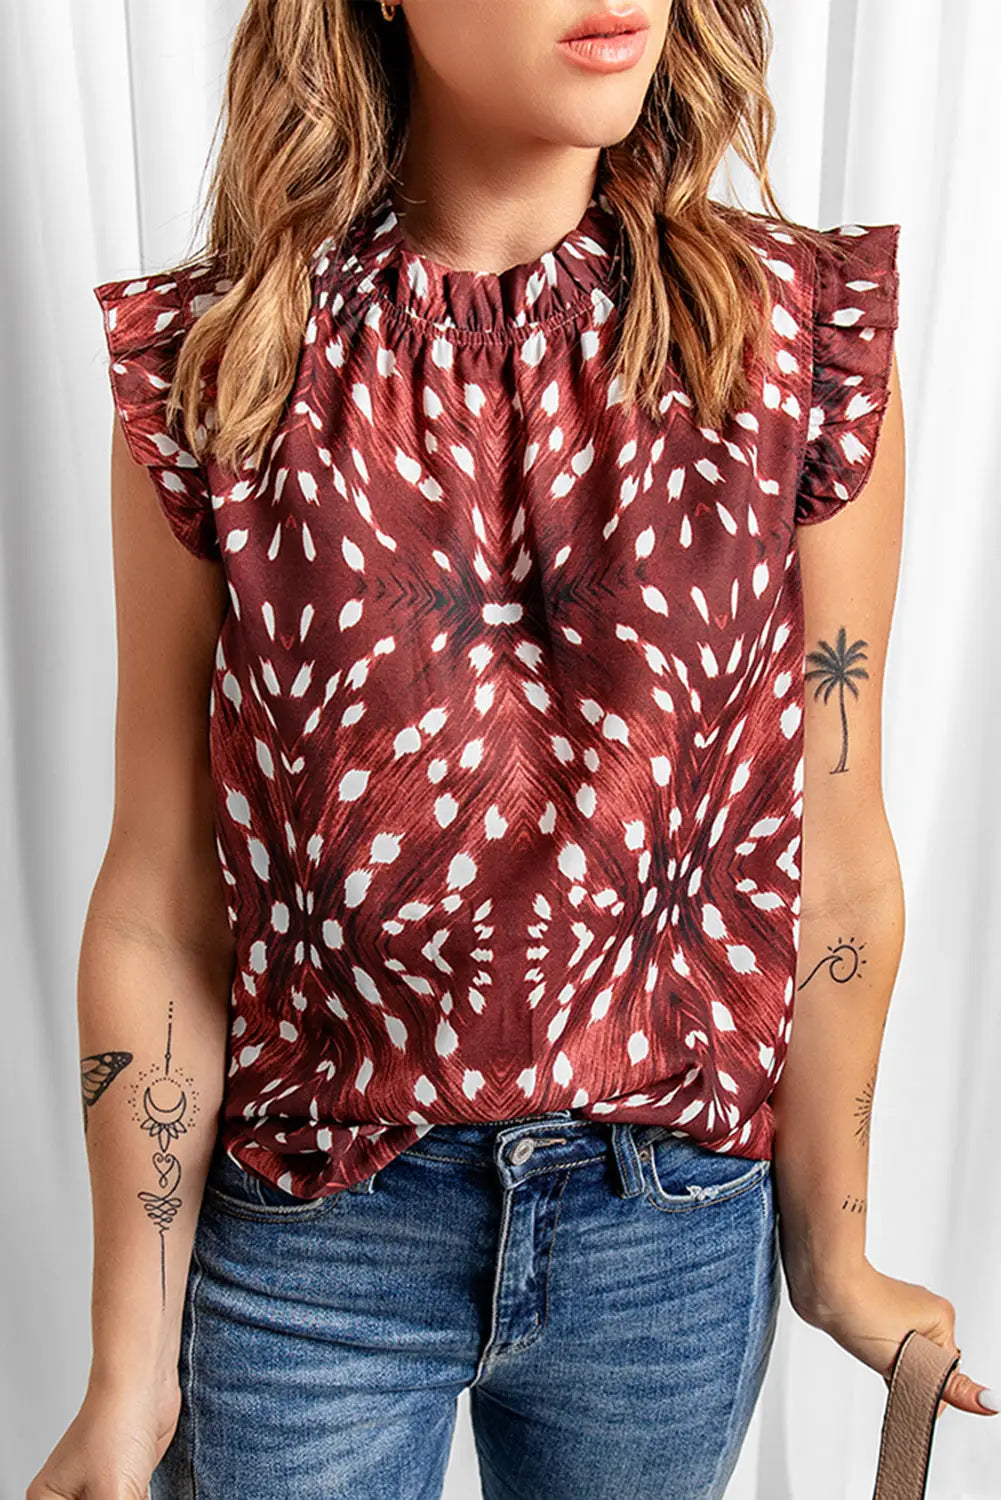 All over print flutter tank top - brown / s / 100%polyester